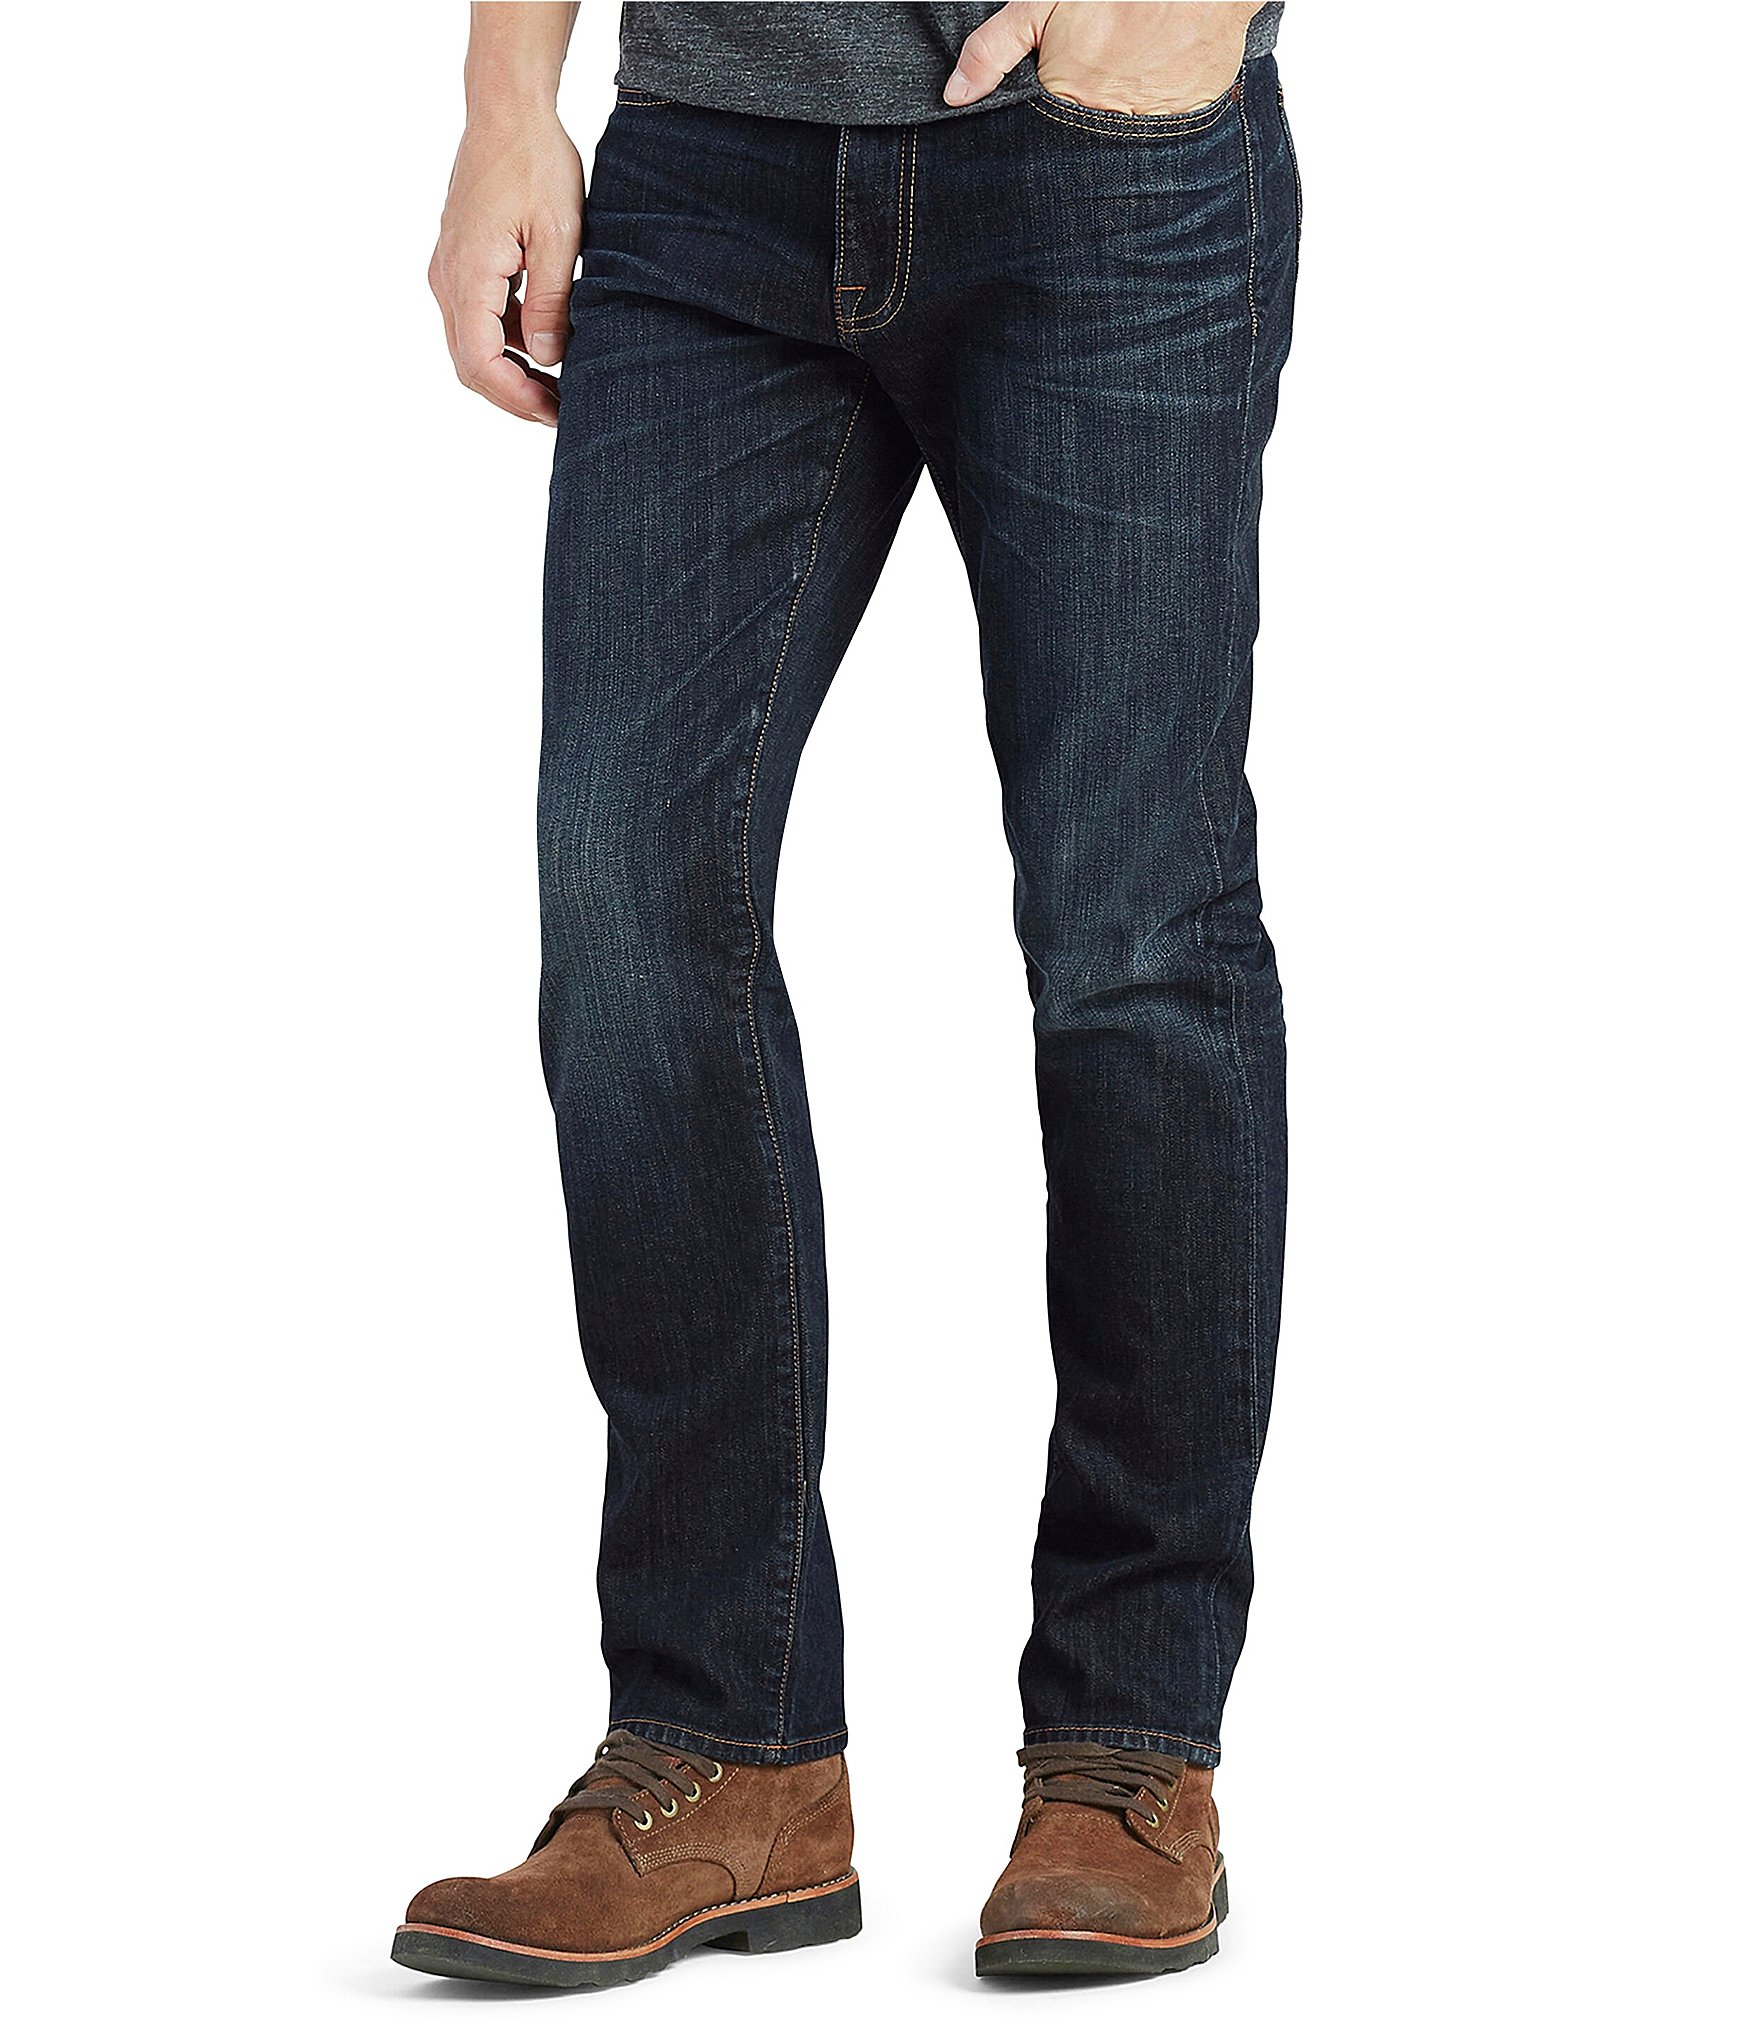 410 ATHLETIC STRAIGHT 4-WAY STRETCH JEAN